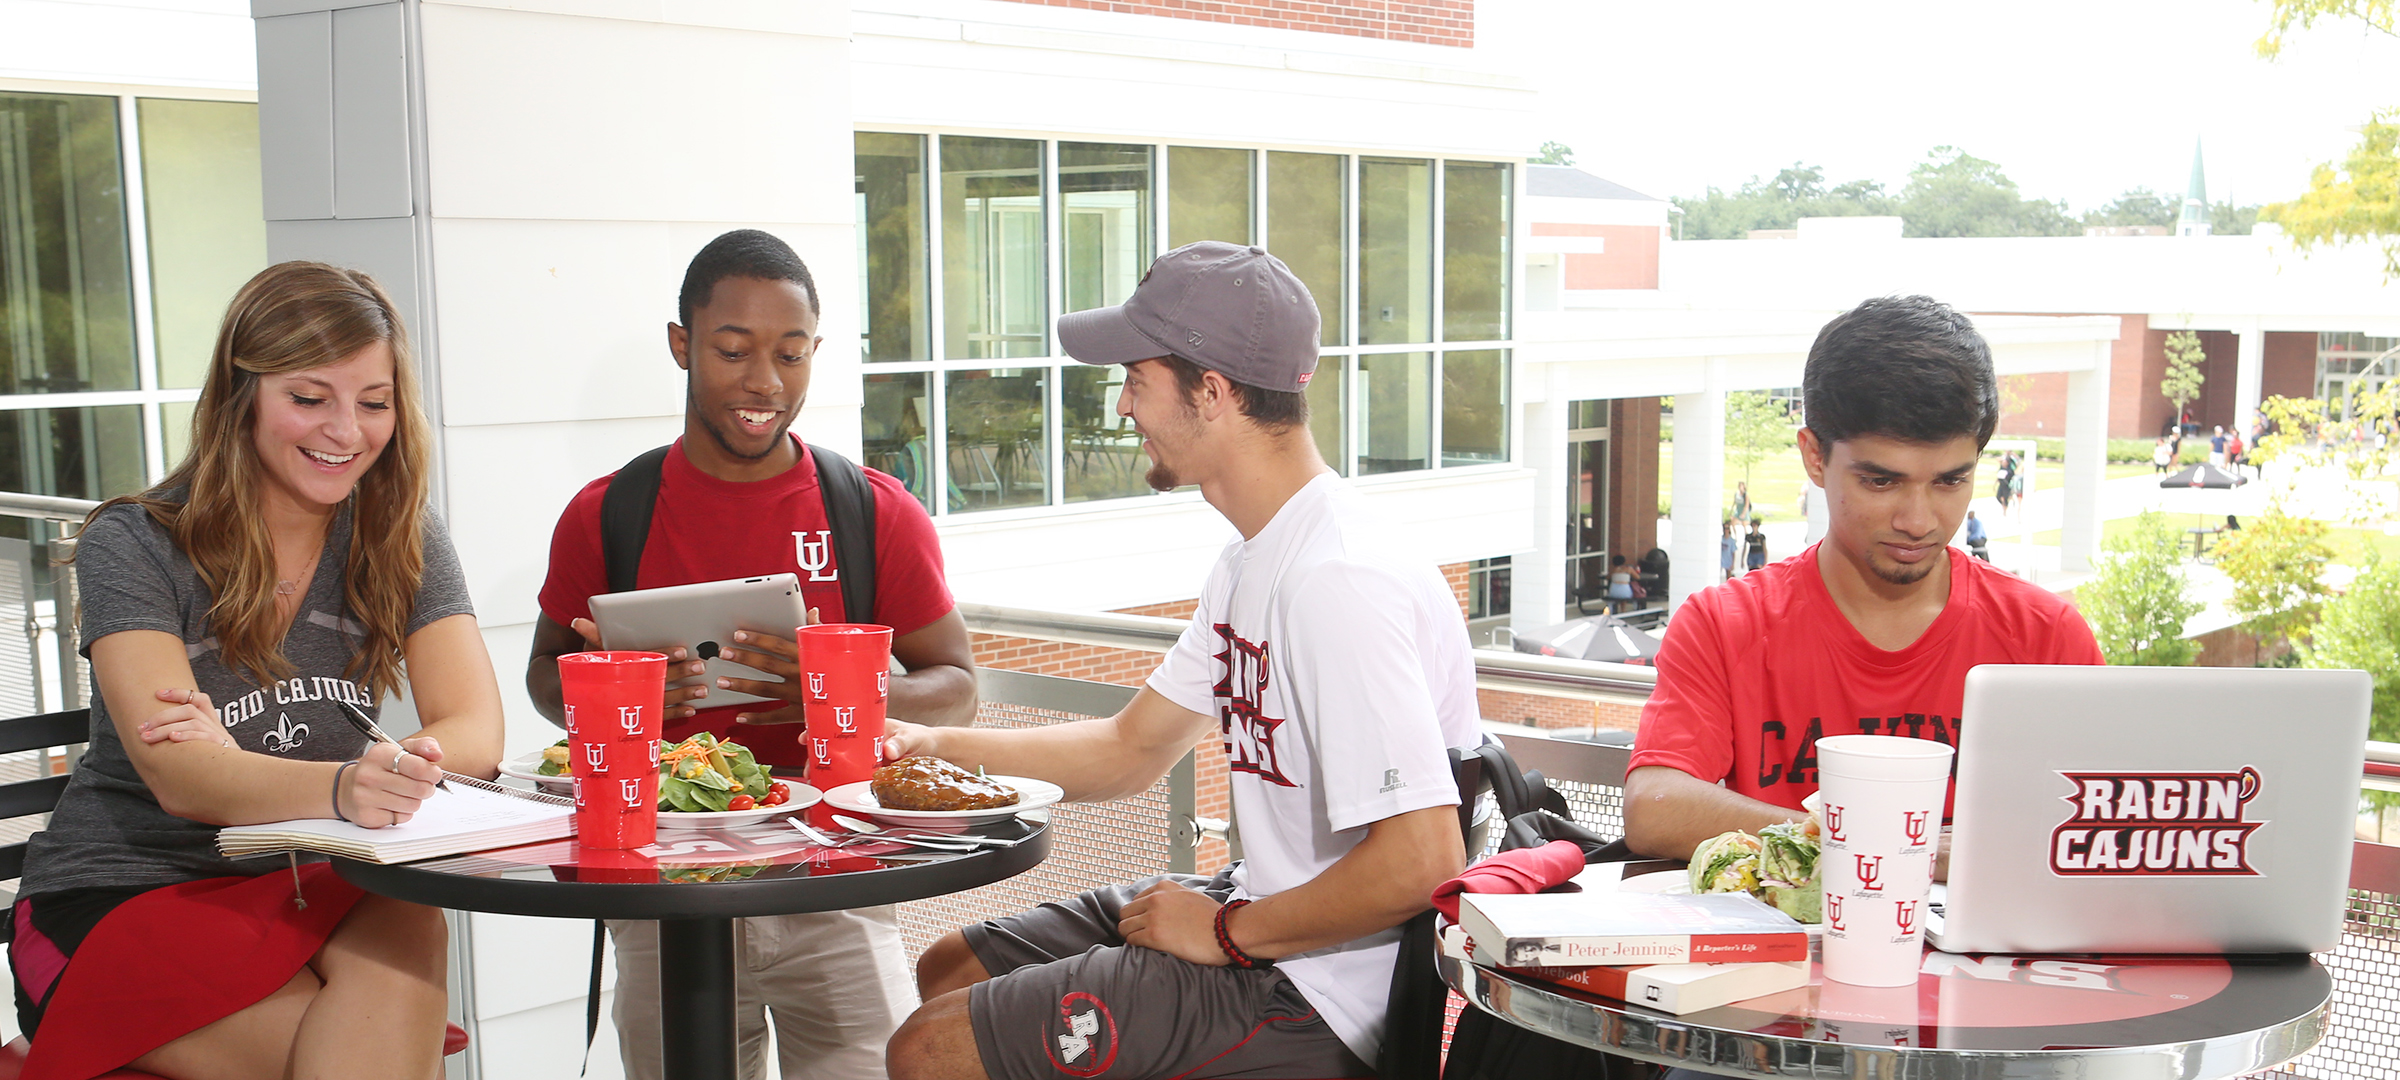 UL Lafayette students eating lunch outsite of Cypress Dining Hall